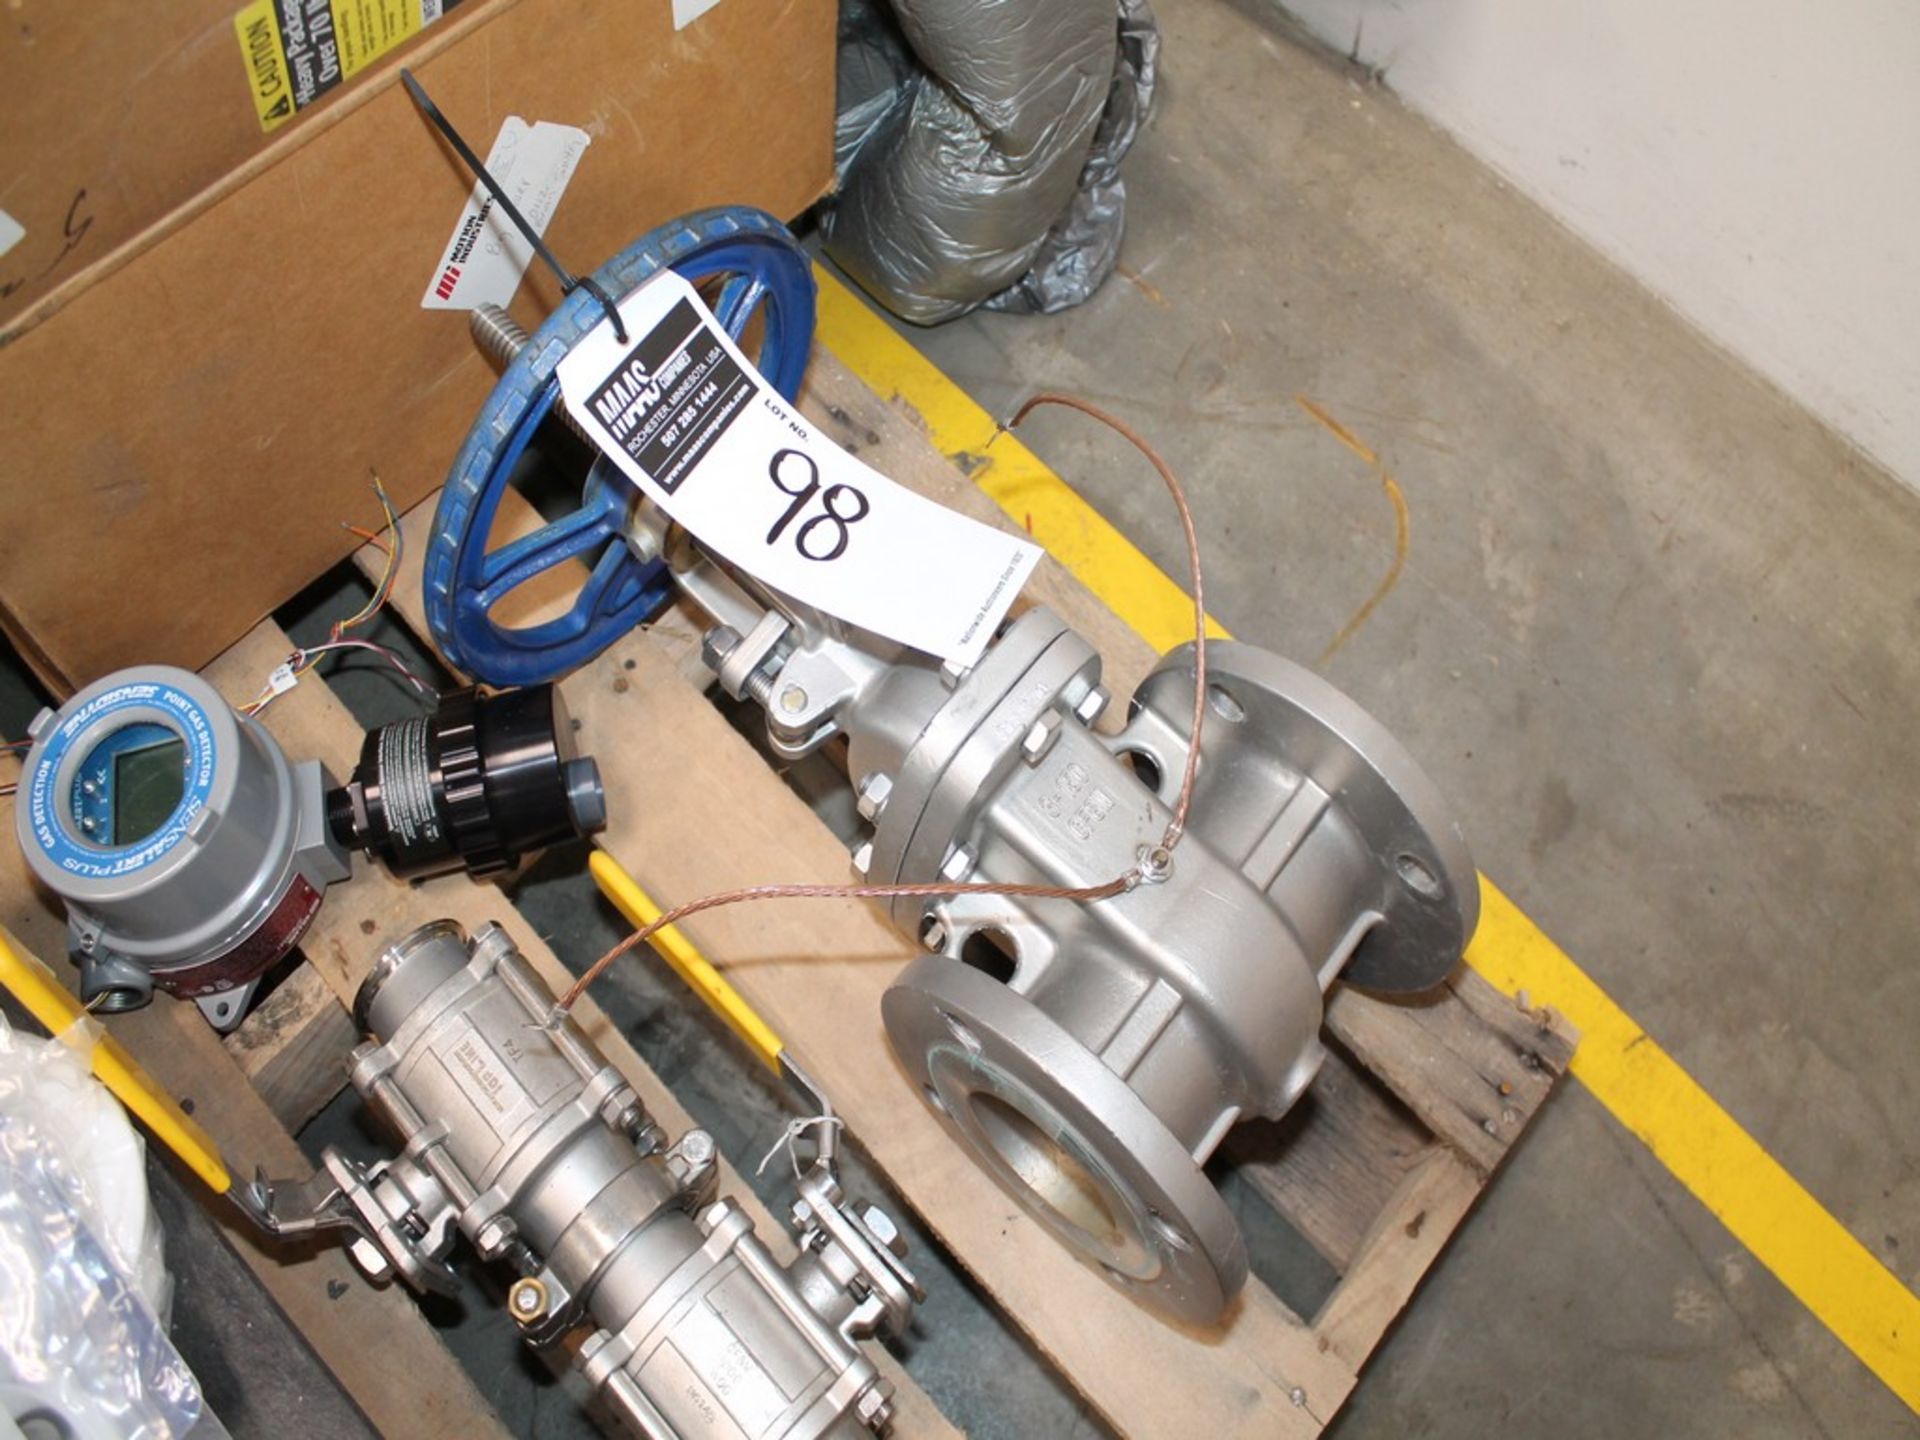 LOT CONTENTS OF PALLET WITH MISCELLANEOUS PUMPS, GAUGES, VALVES, METERS - Image 8 of 12